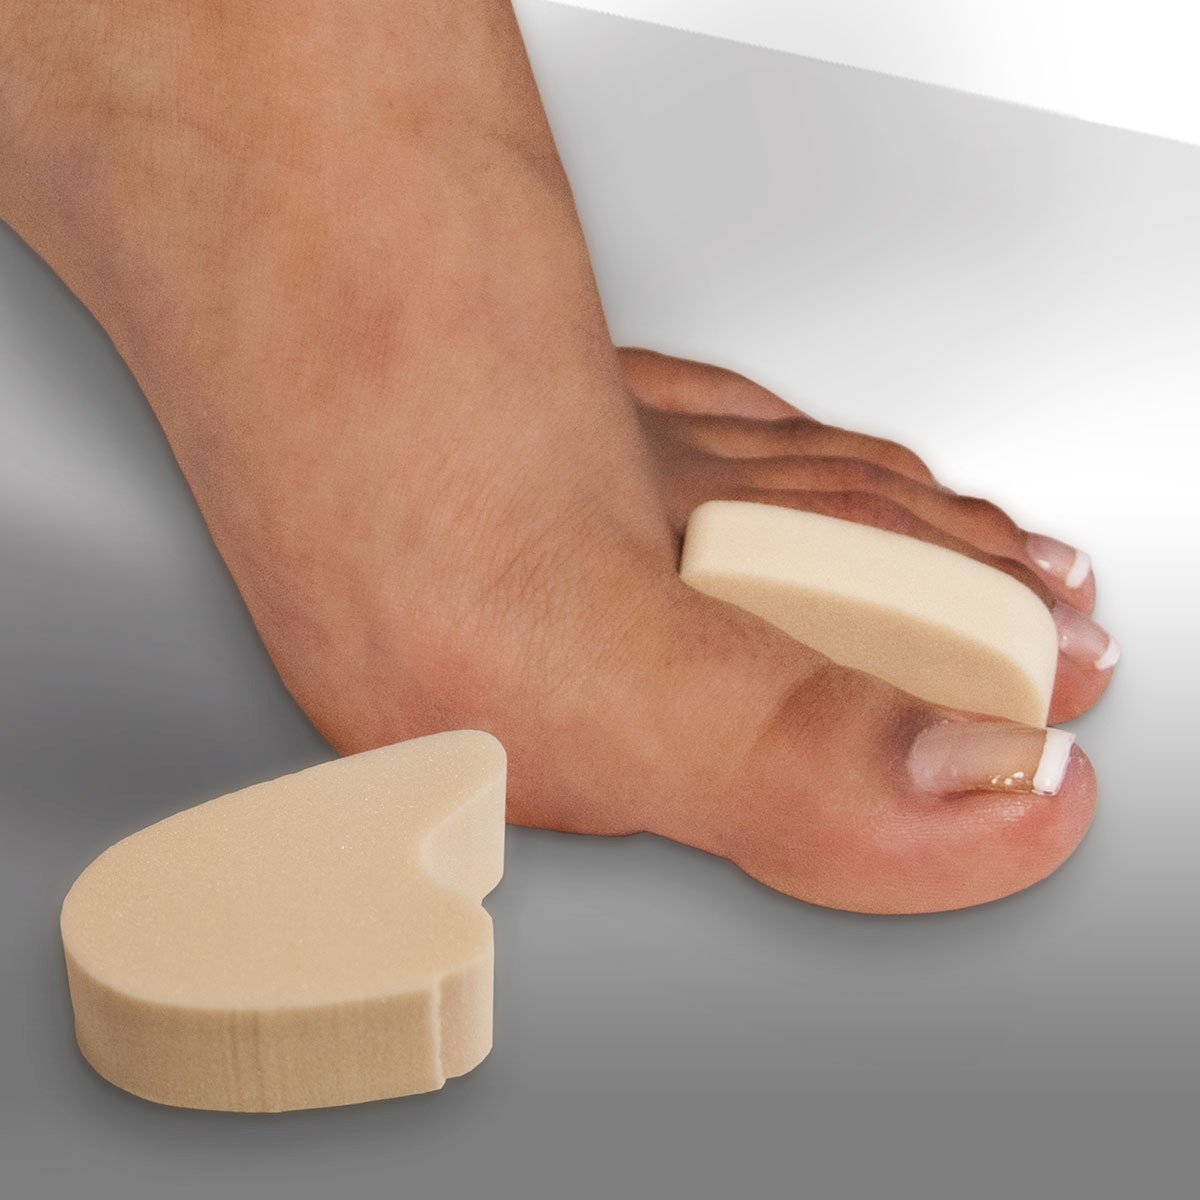 Toe Spacer - Large/Firm